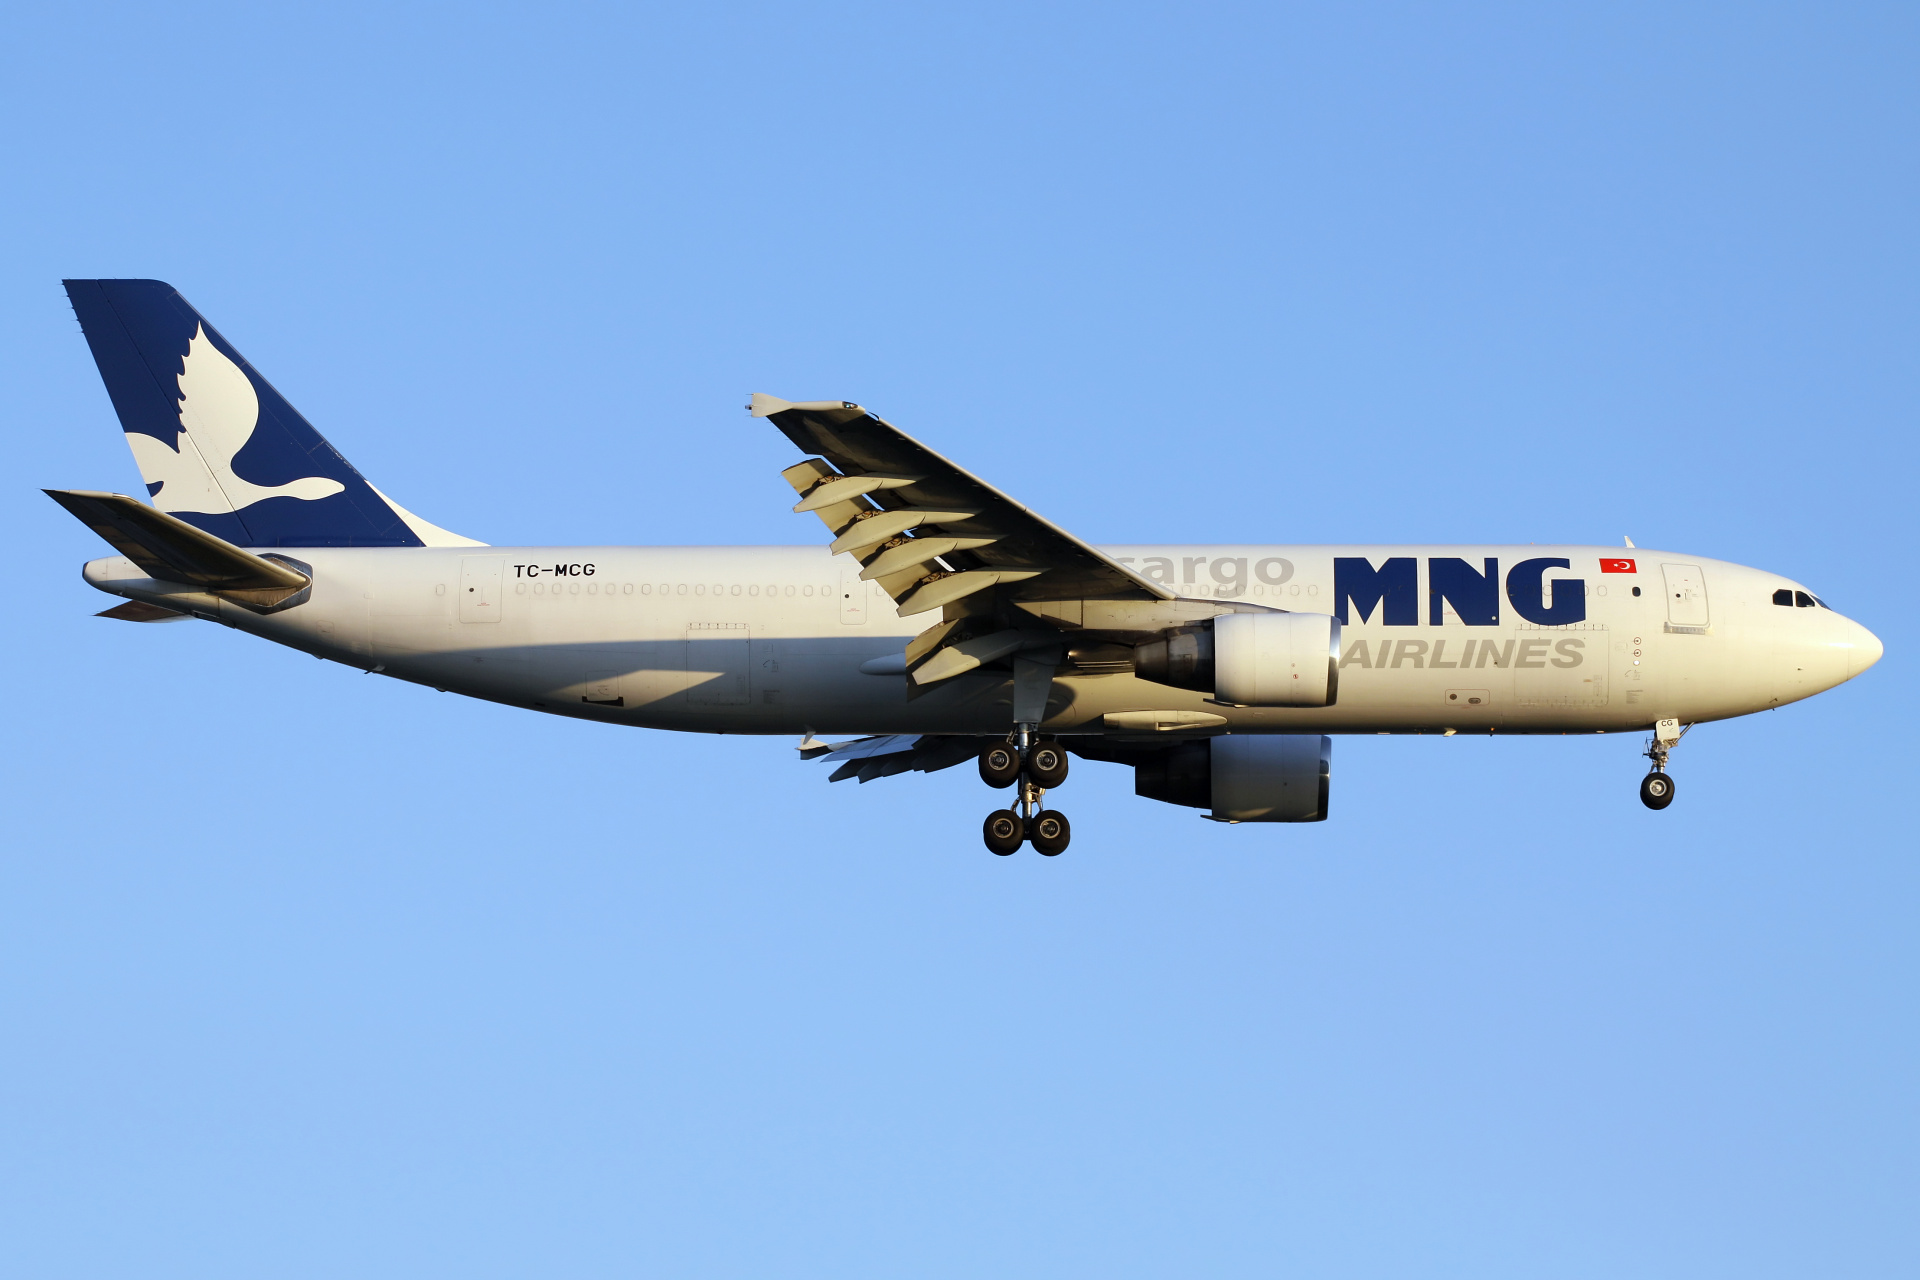 TC-MCG, MNG Airlines Cargo (Aircraft » Istanbul Atatürk Airport » Airbus A300B4-600F)